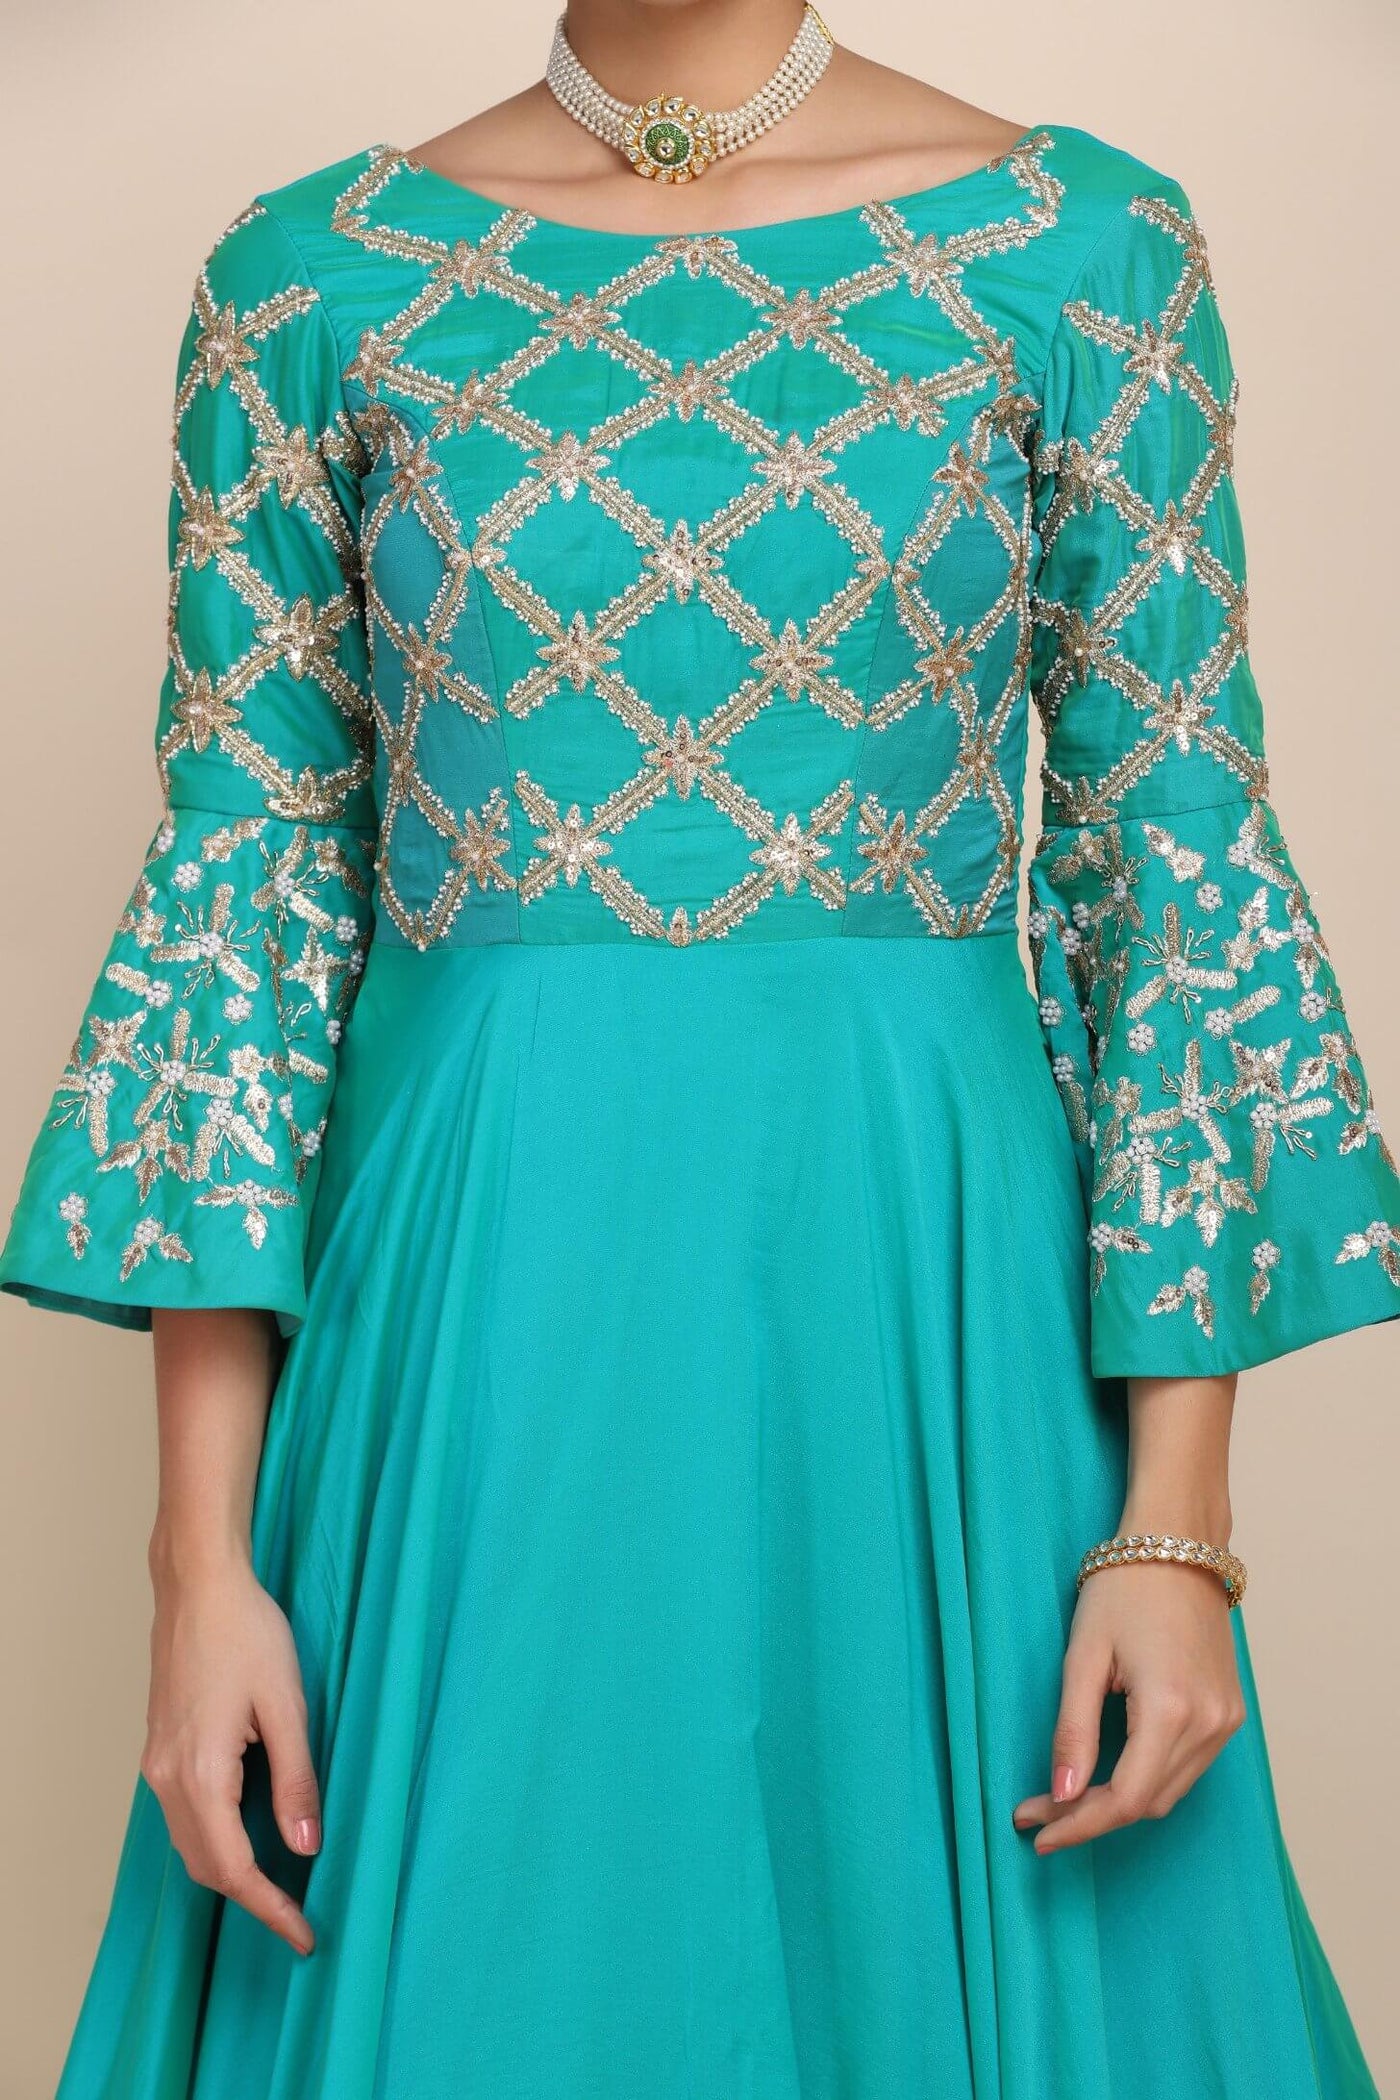 closer look showing details of turquoise dress